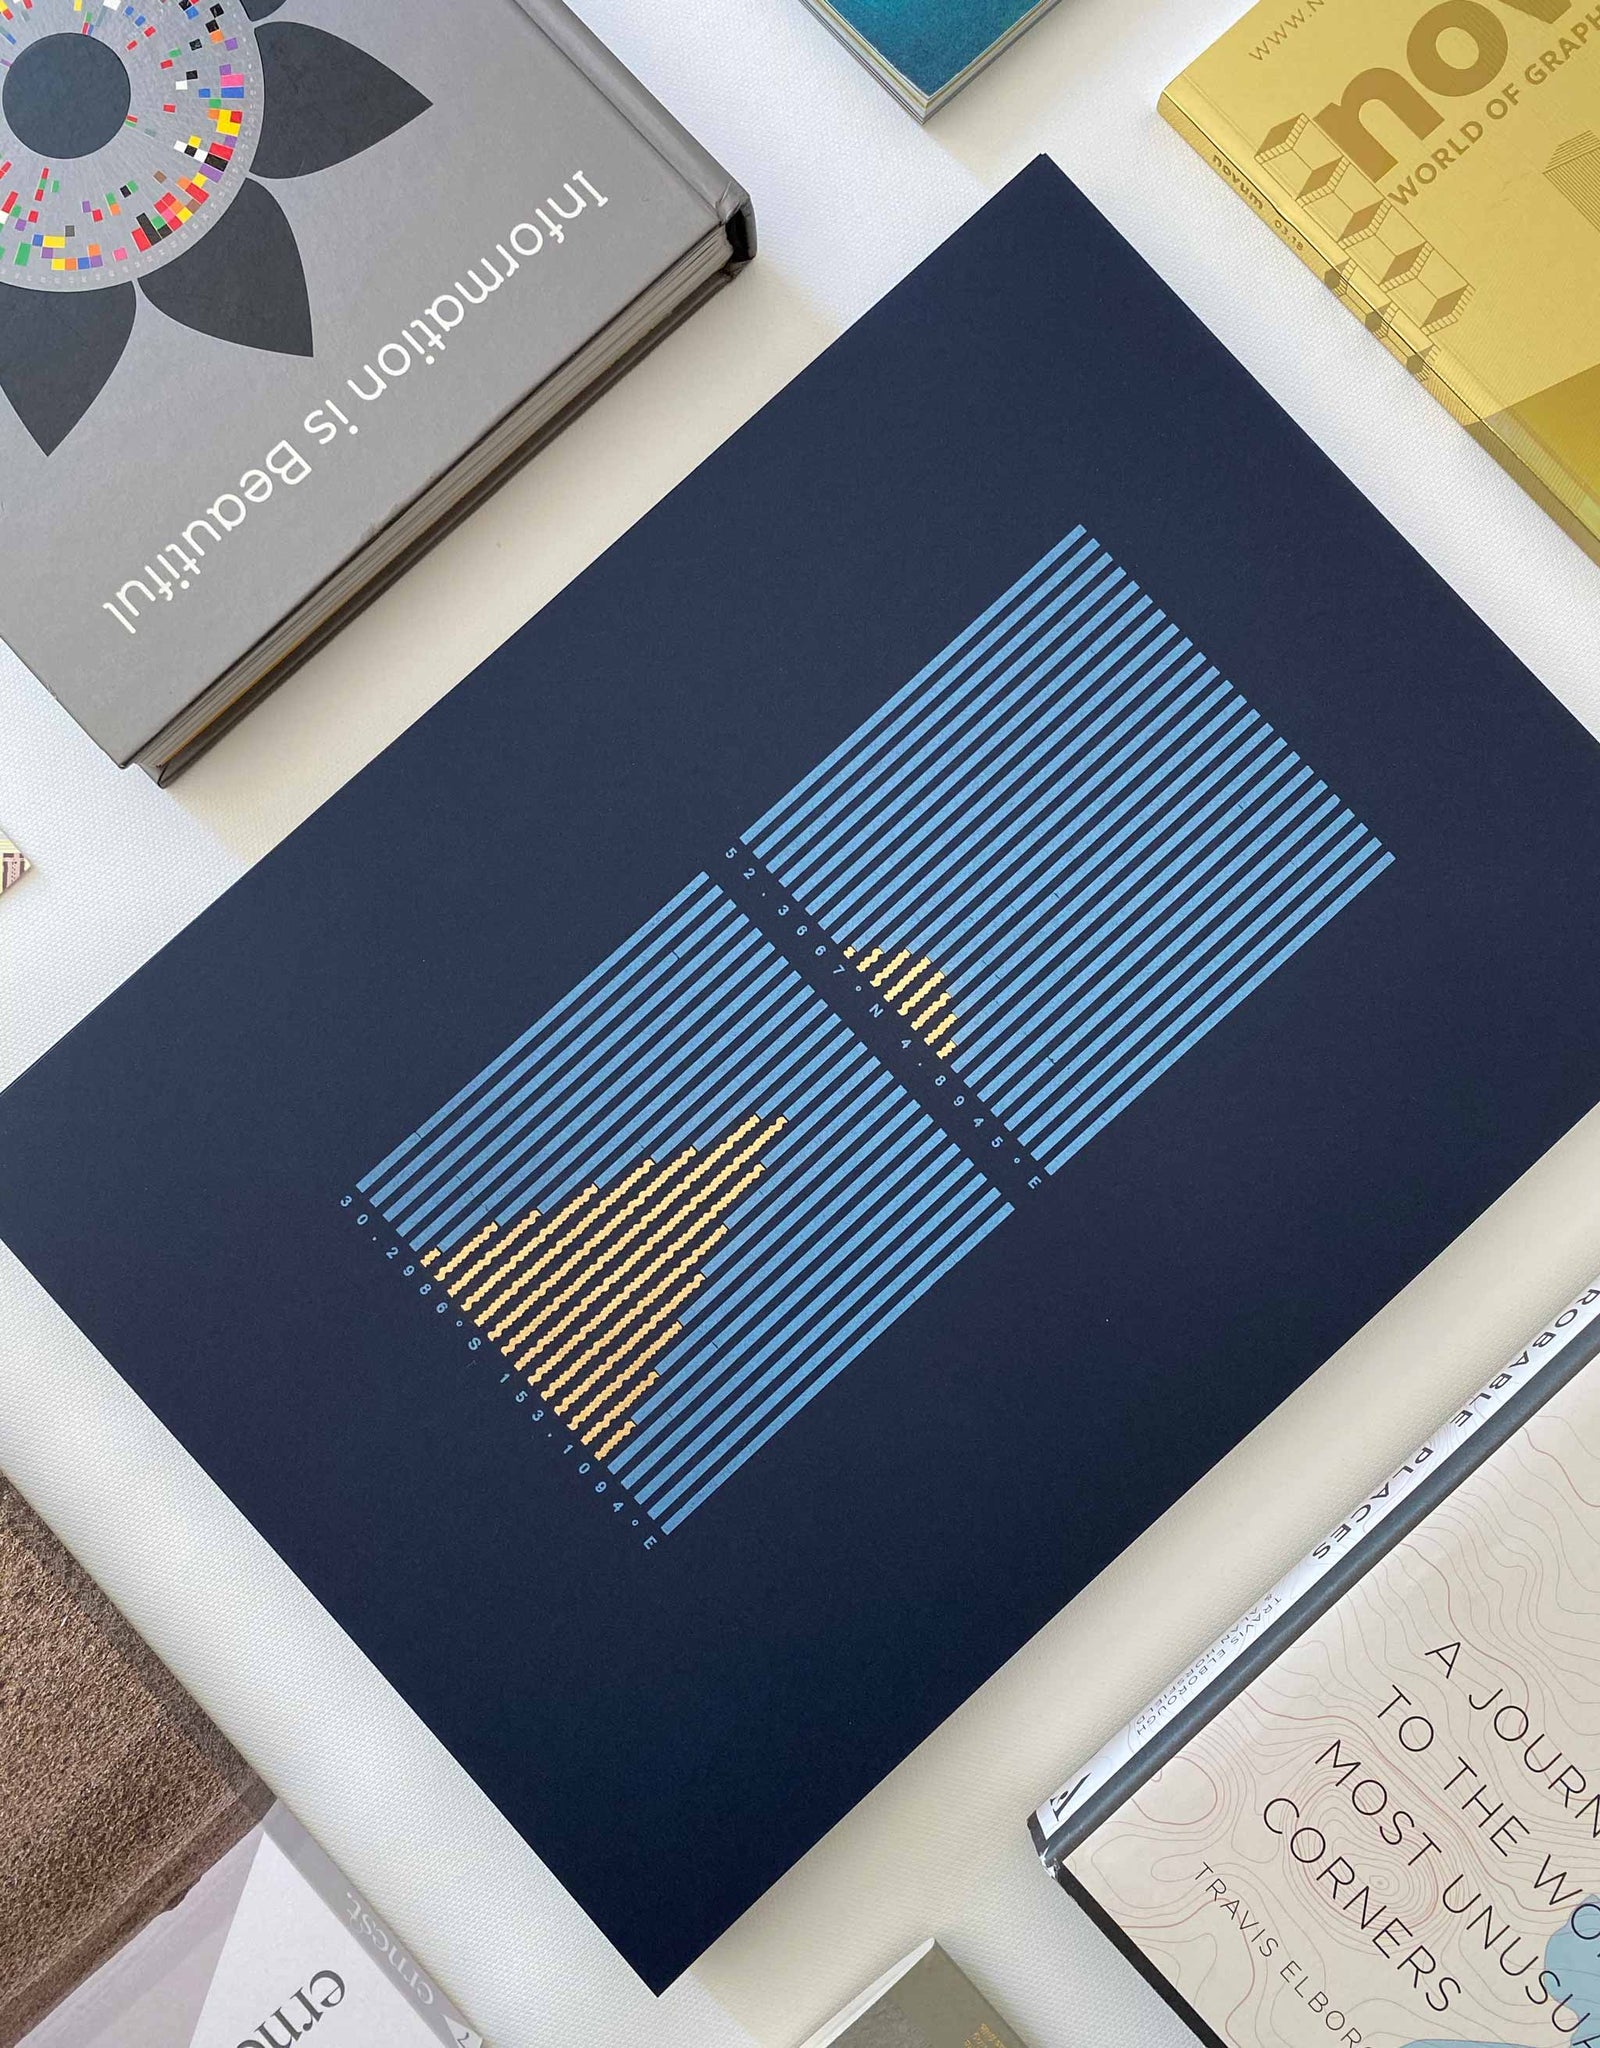 45 degree angle view of Letterpress data print Sunlight Hours. Light blue and gold vertical lines on dark blue background. Framed with books.